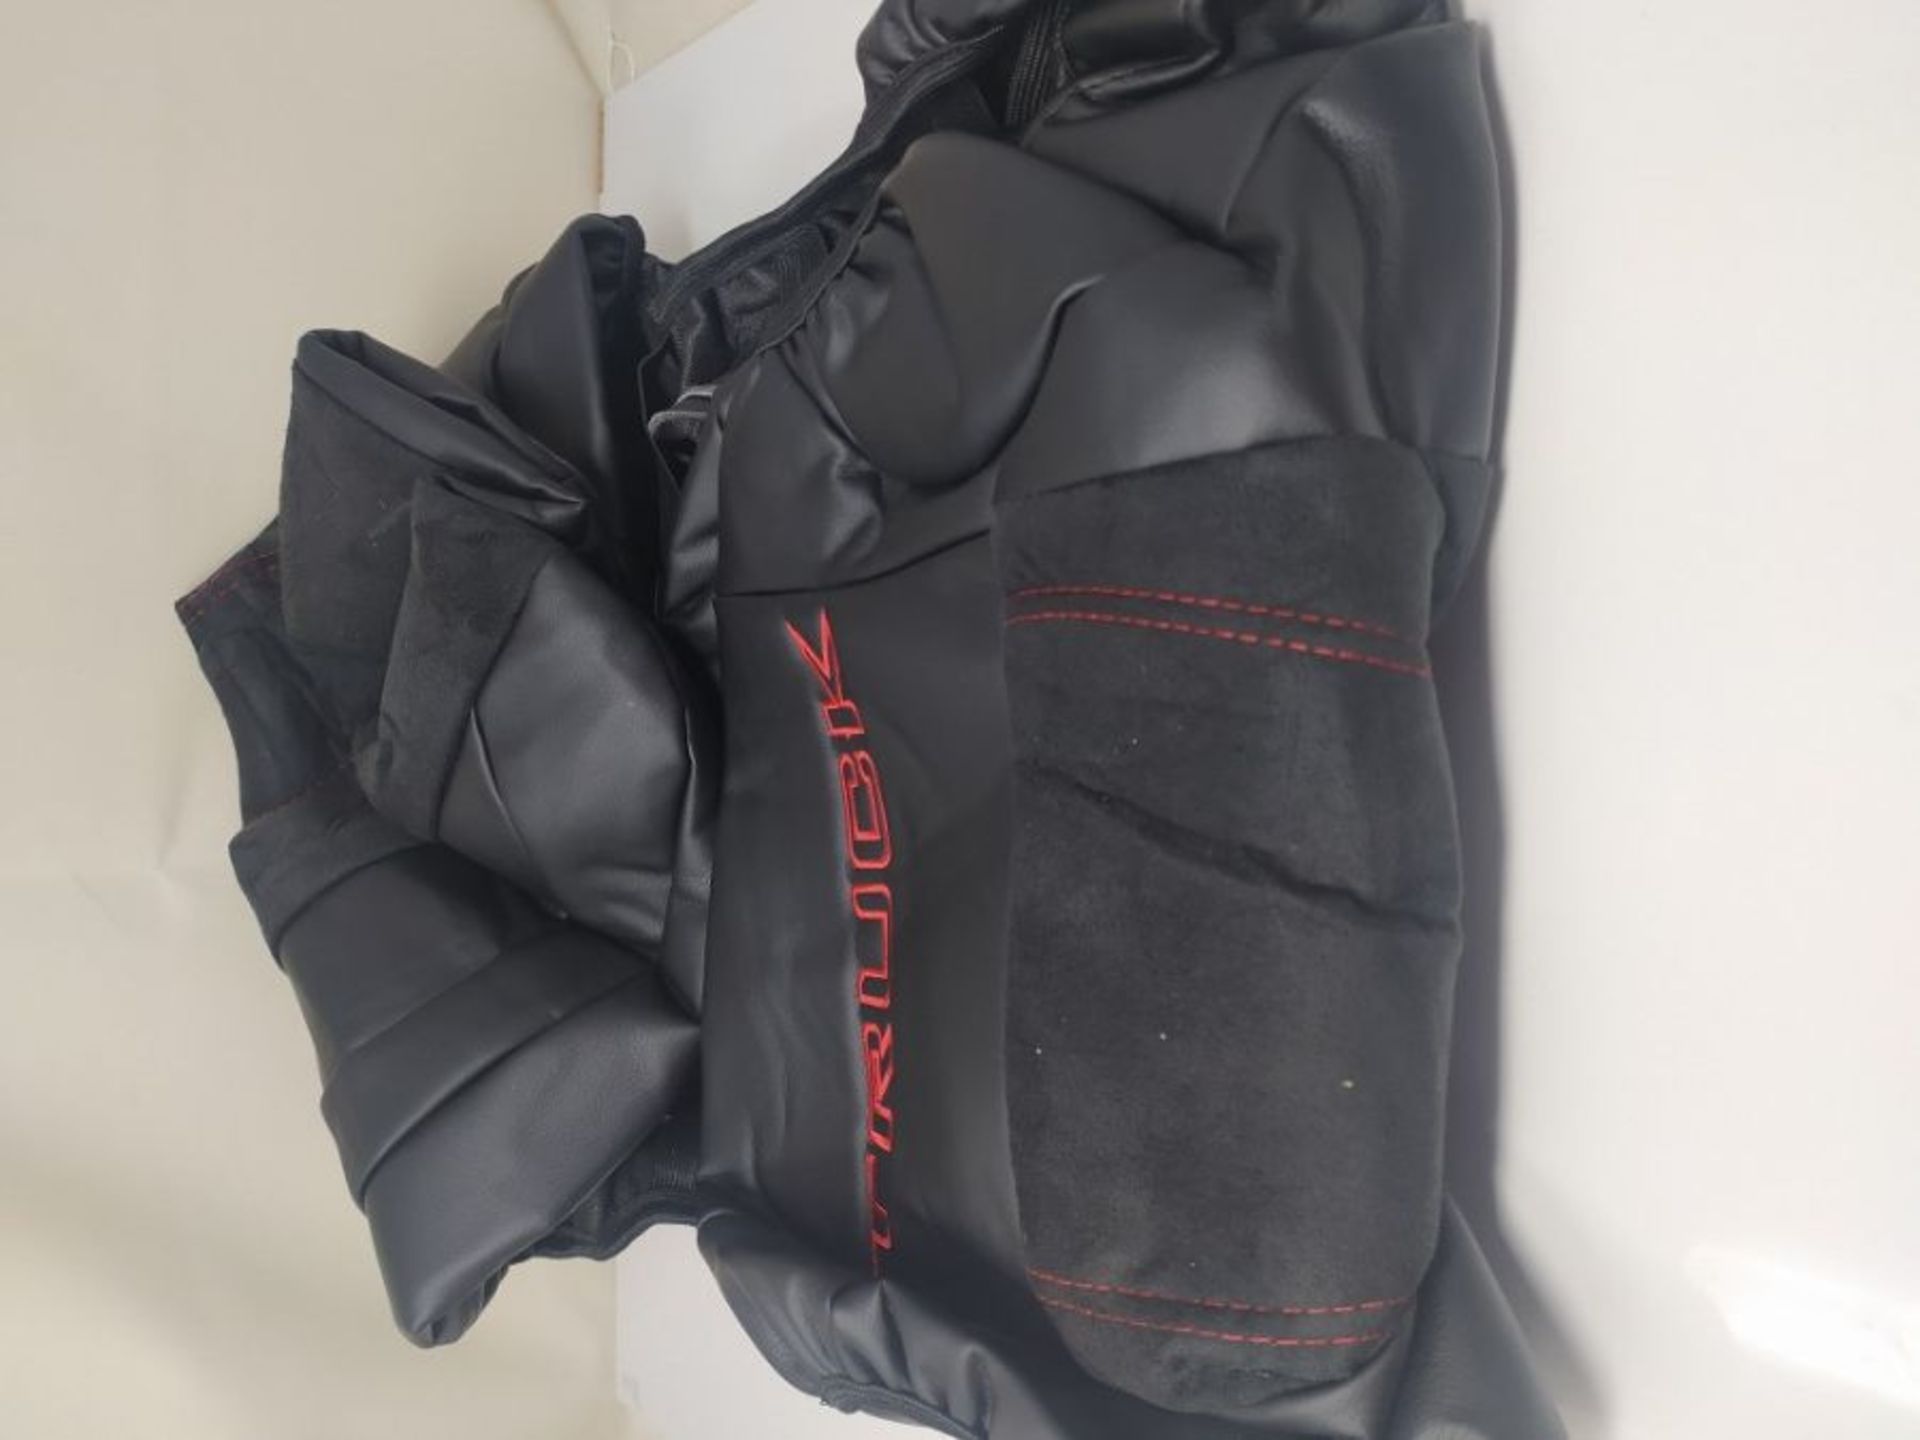 Lampa Luana Truck Seat covering made from Imitation Leather Black/Red - Image 2 of 2